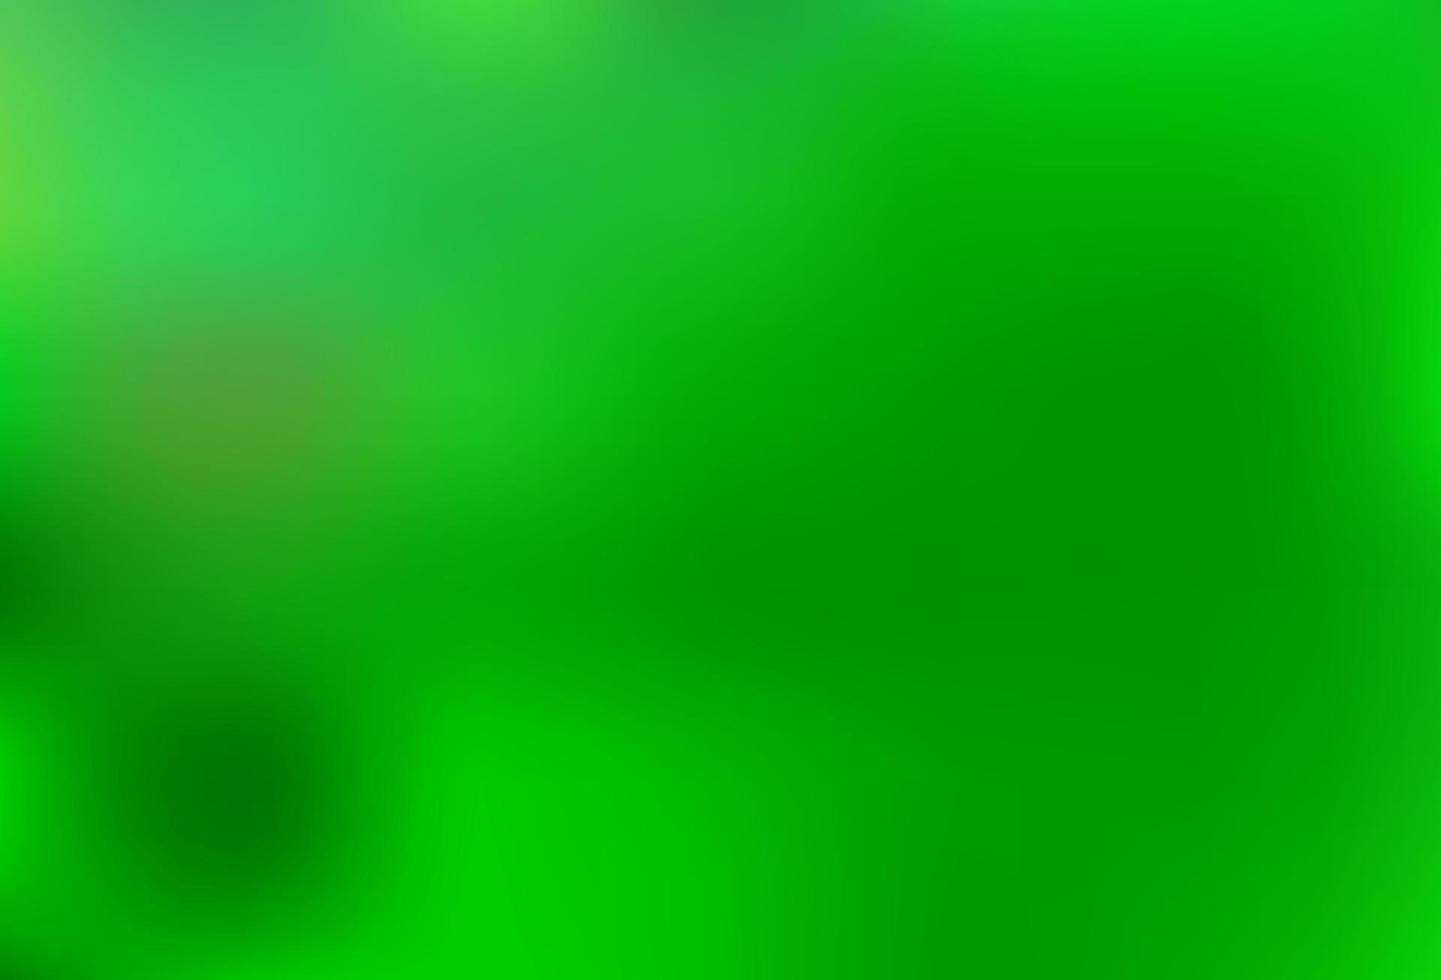 Light Green vector blurred and colored background.